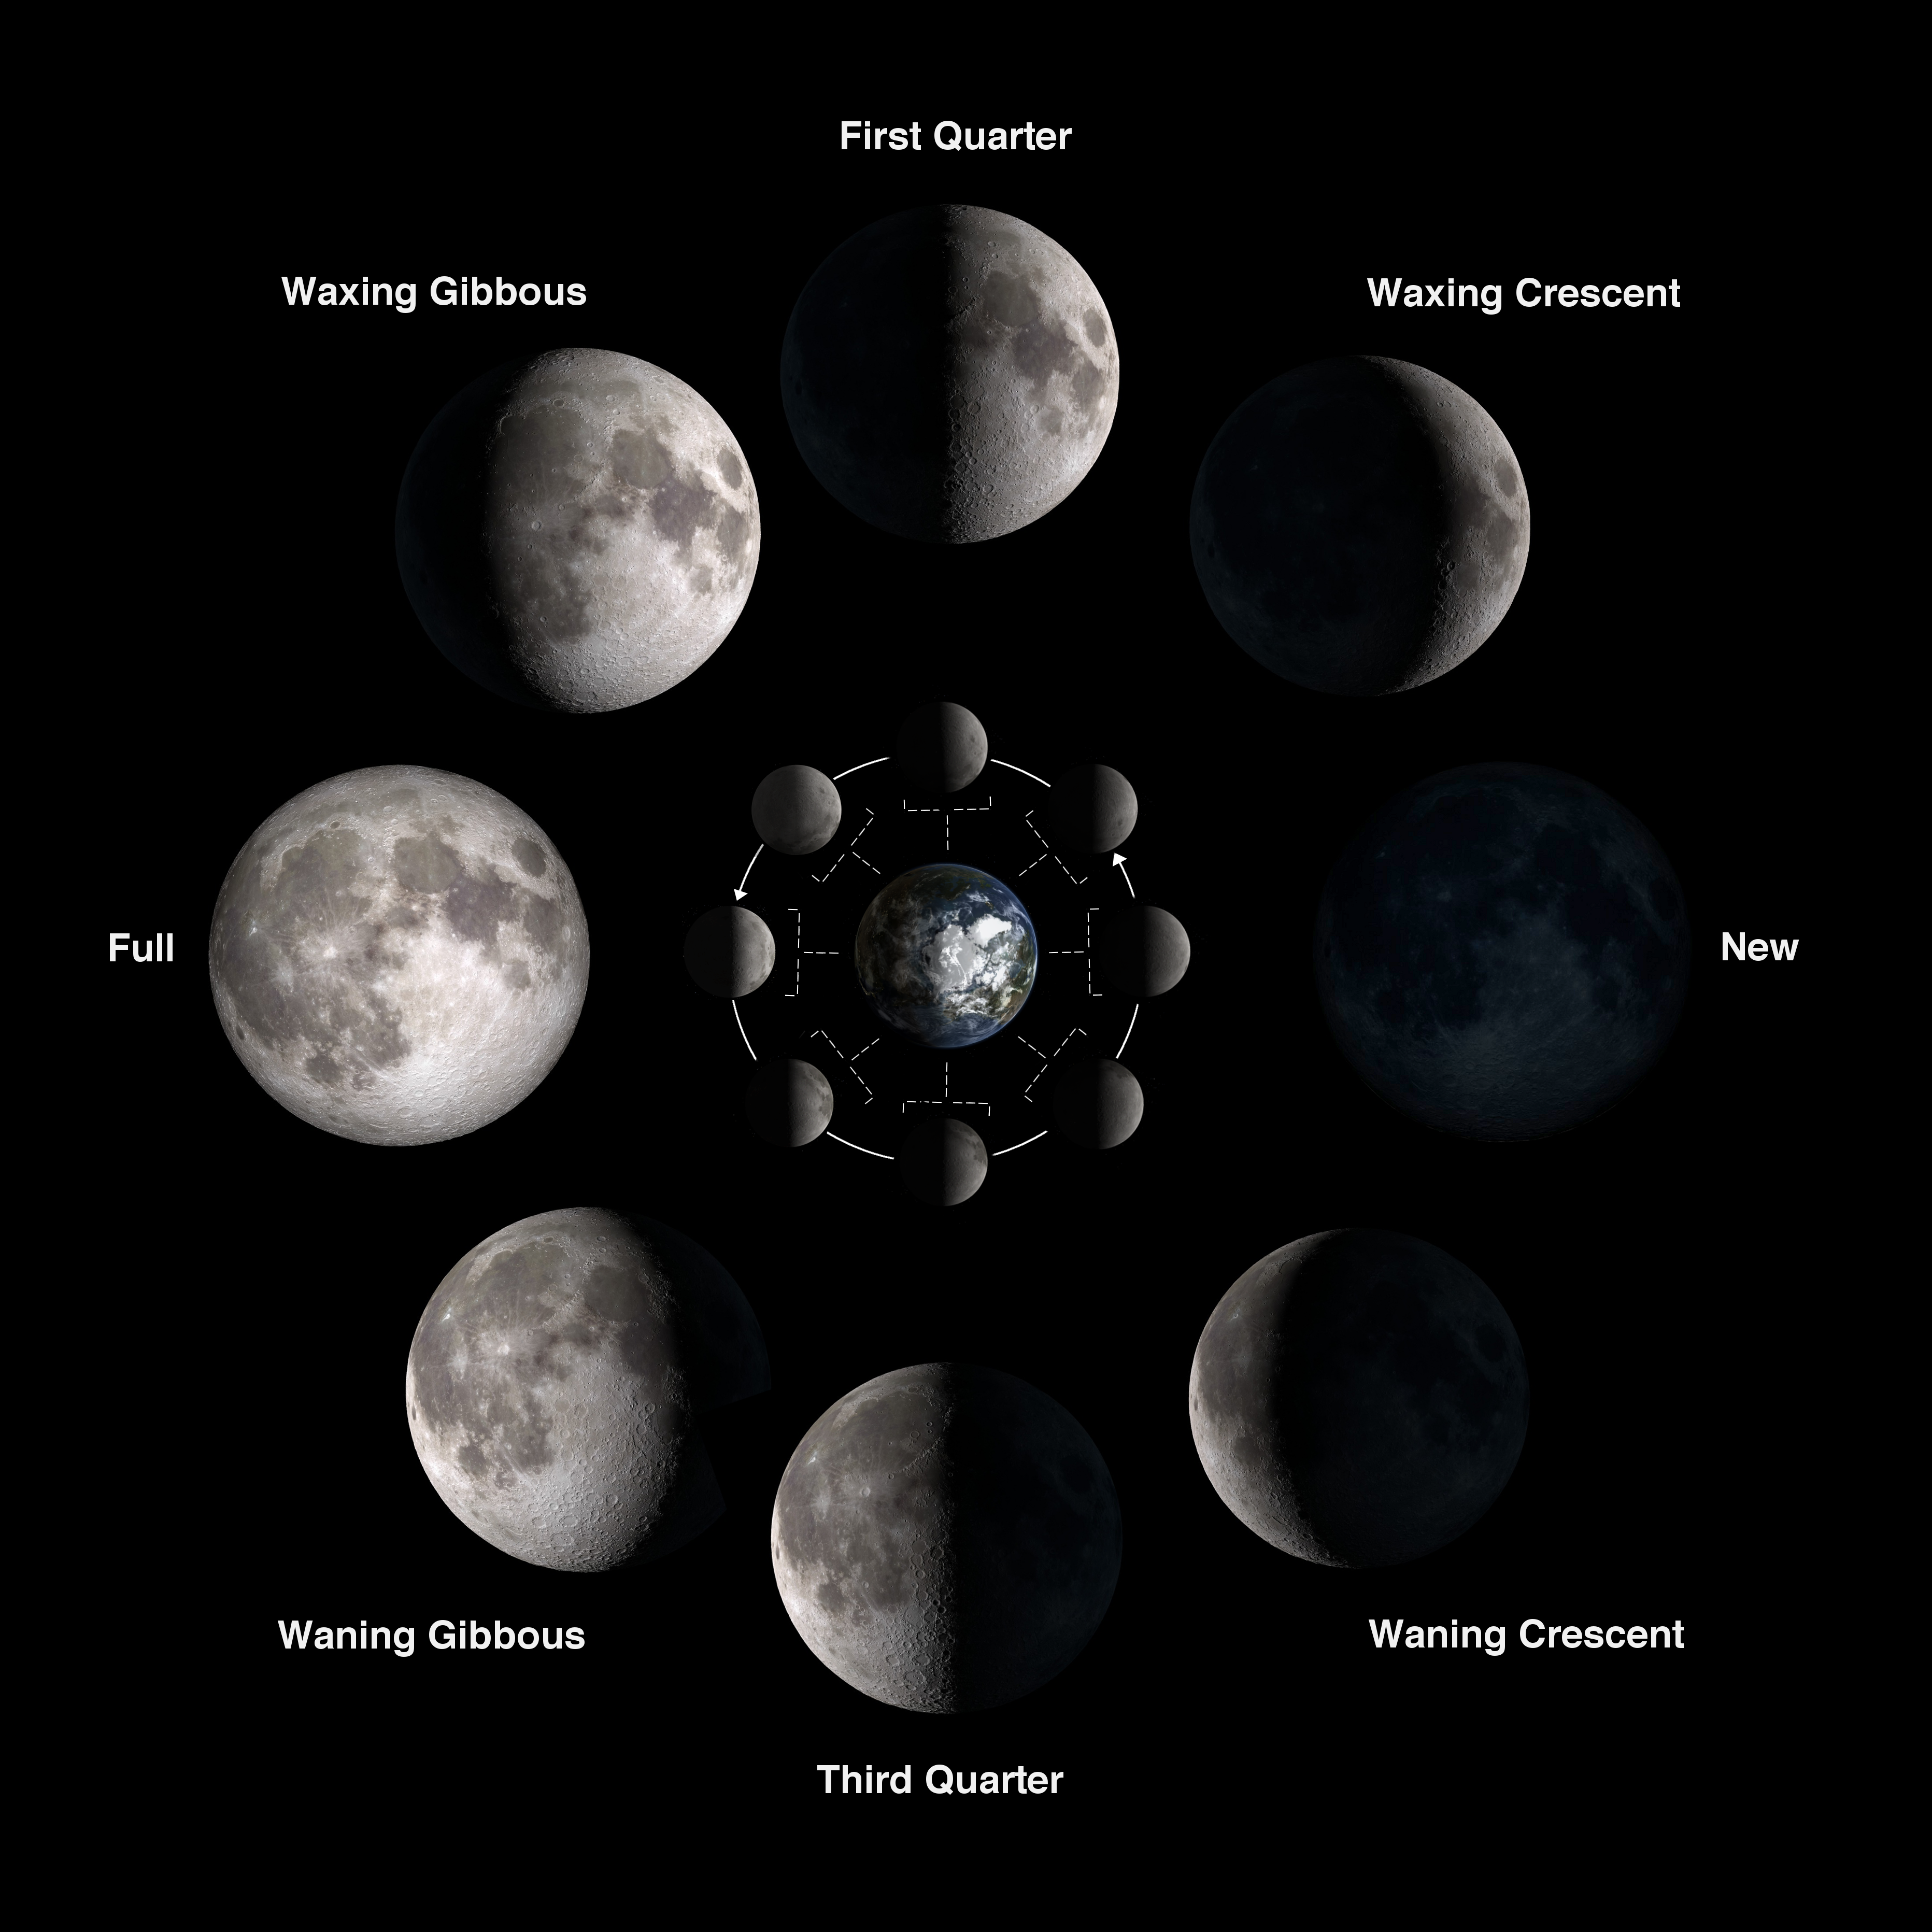 Chart showing the different phases of the Moon